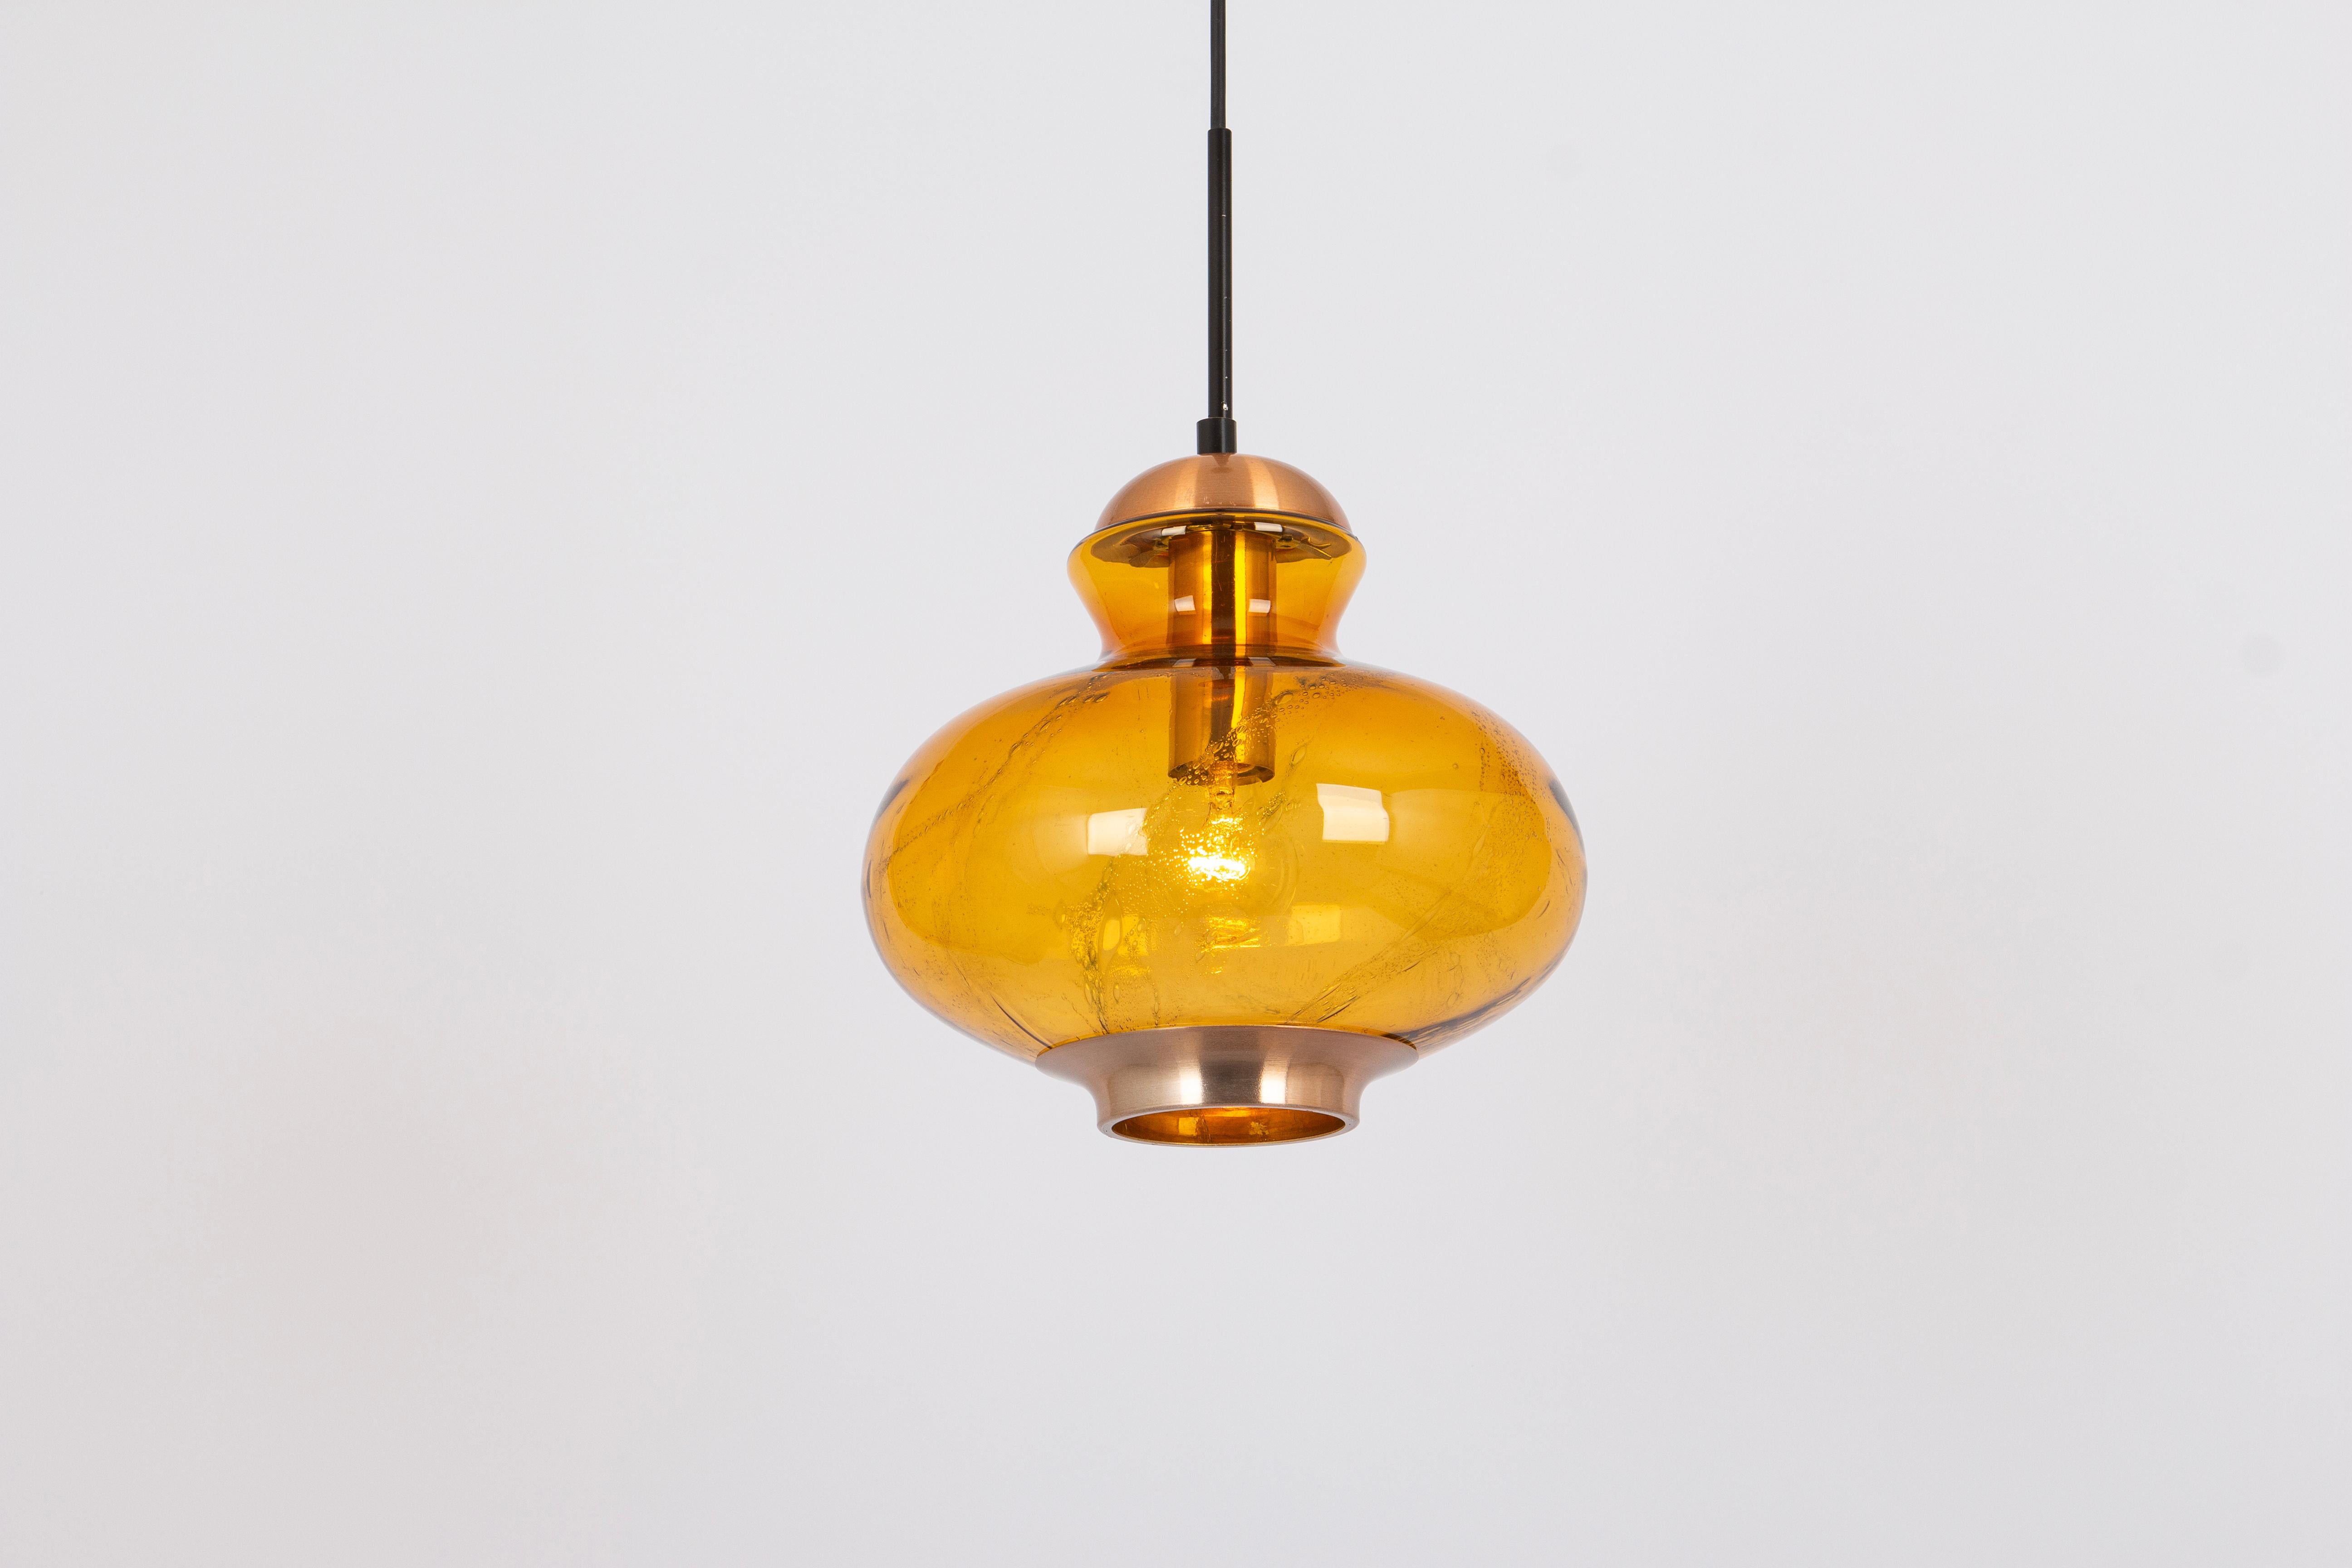 Petite Doria Pendant light with large volcanic Murano glass ball.
High-quality materials give a wonderful light effect when it is on.

Very good condition. Cleaned, well-wired, and ready to use. 

The fixture requires one standard bulb (E-27)
Light